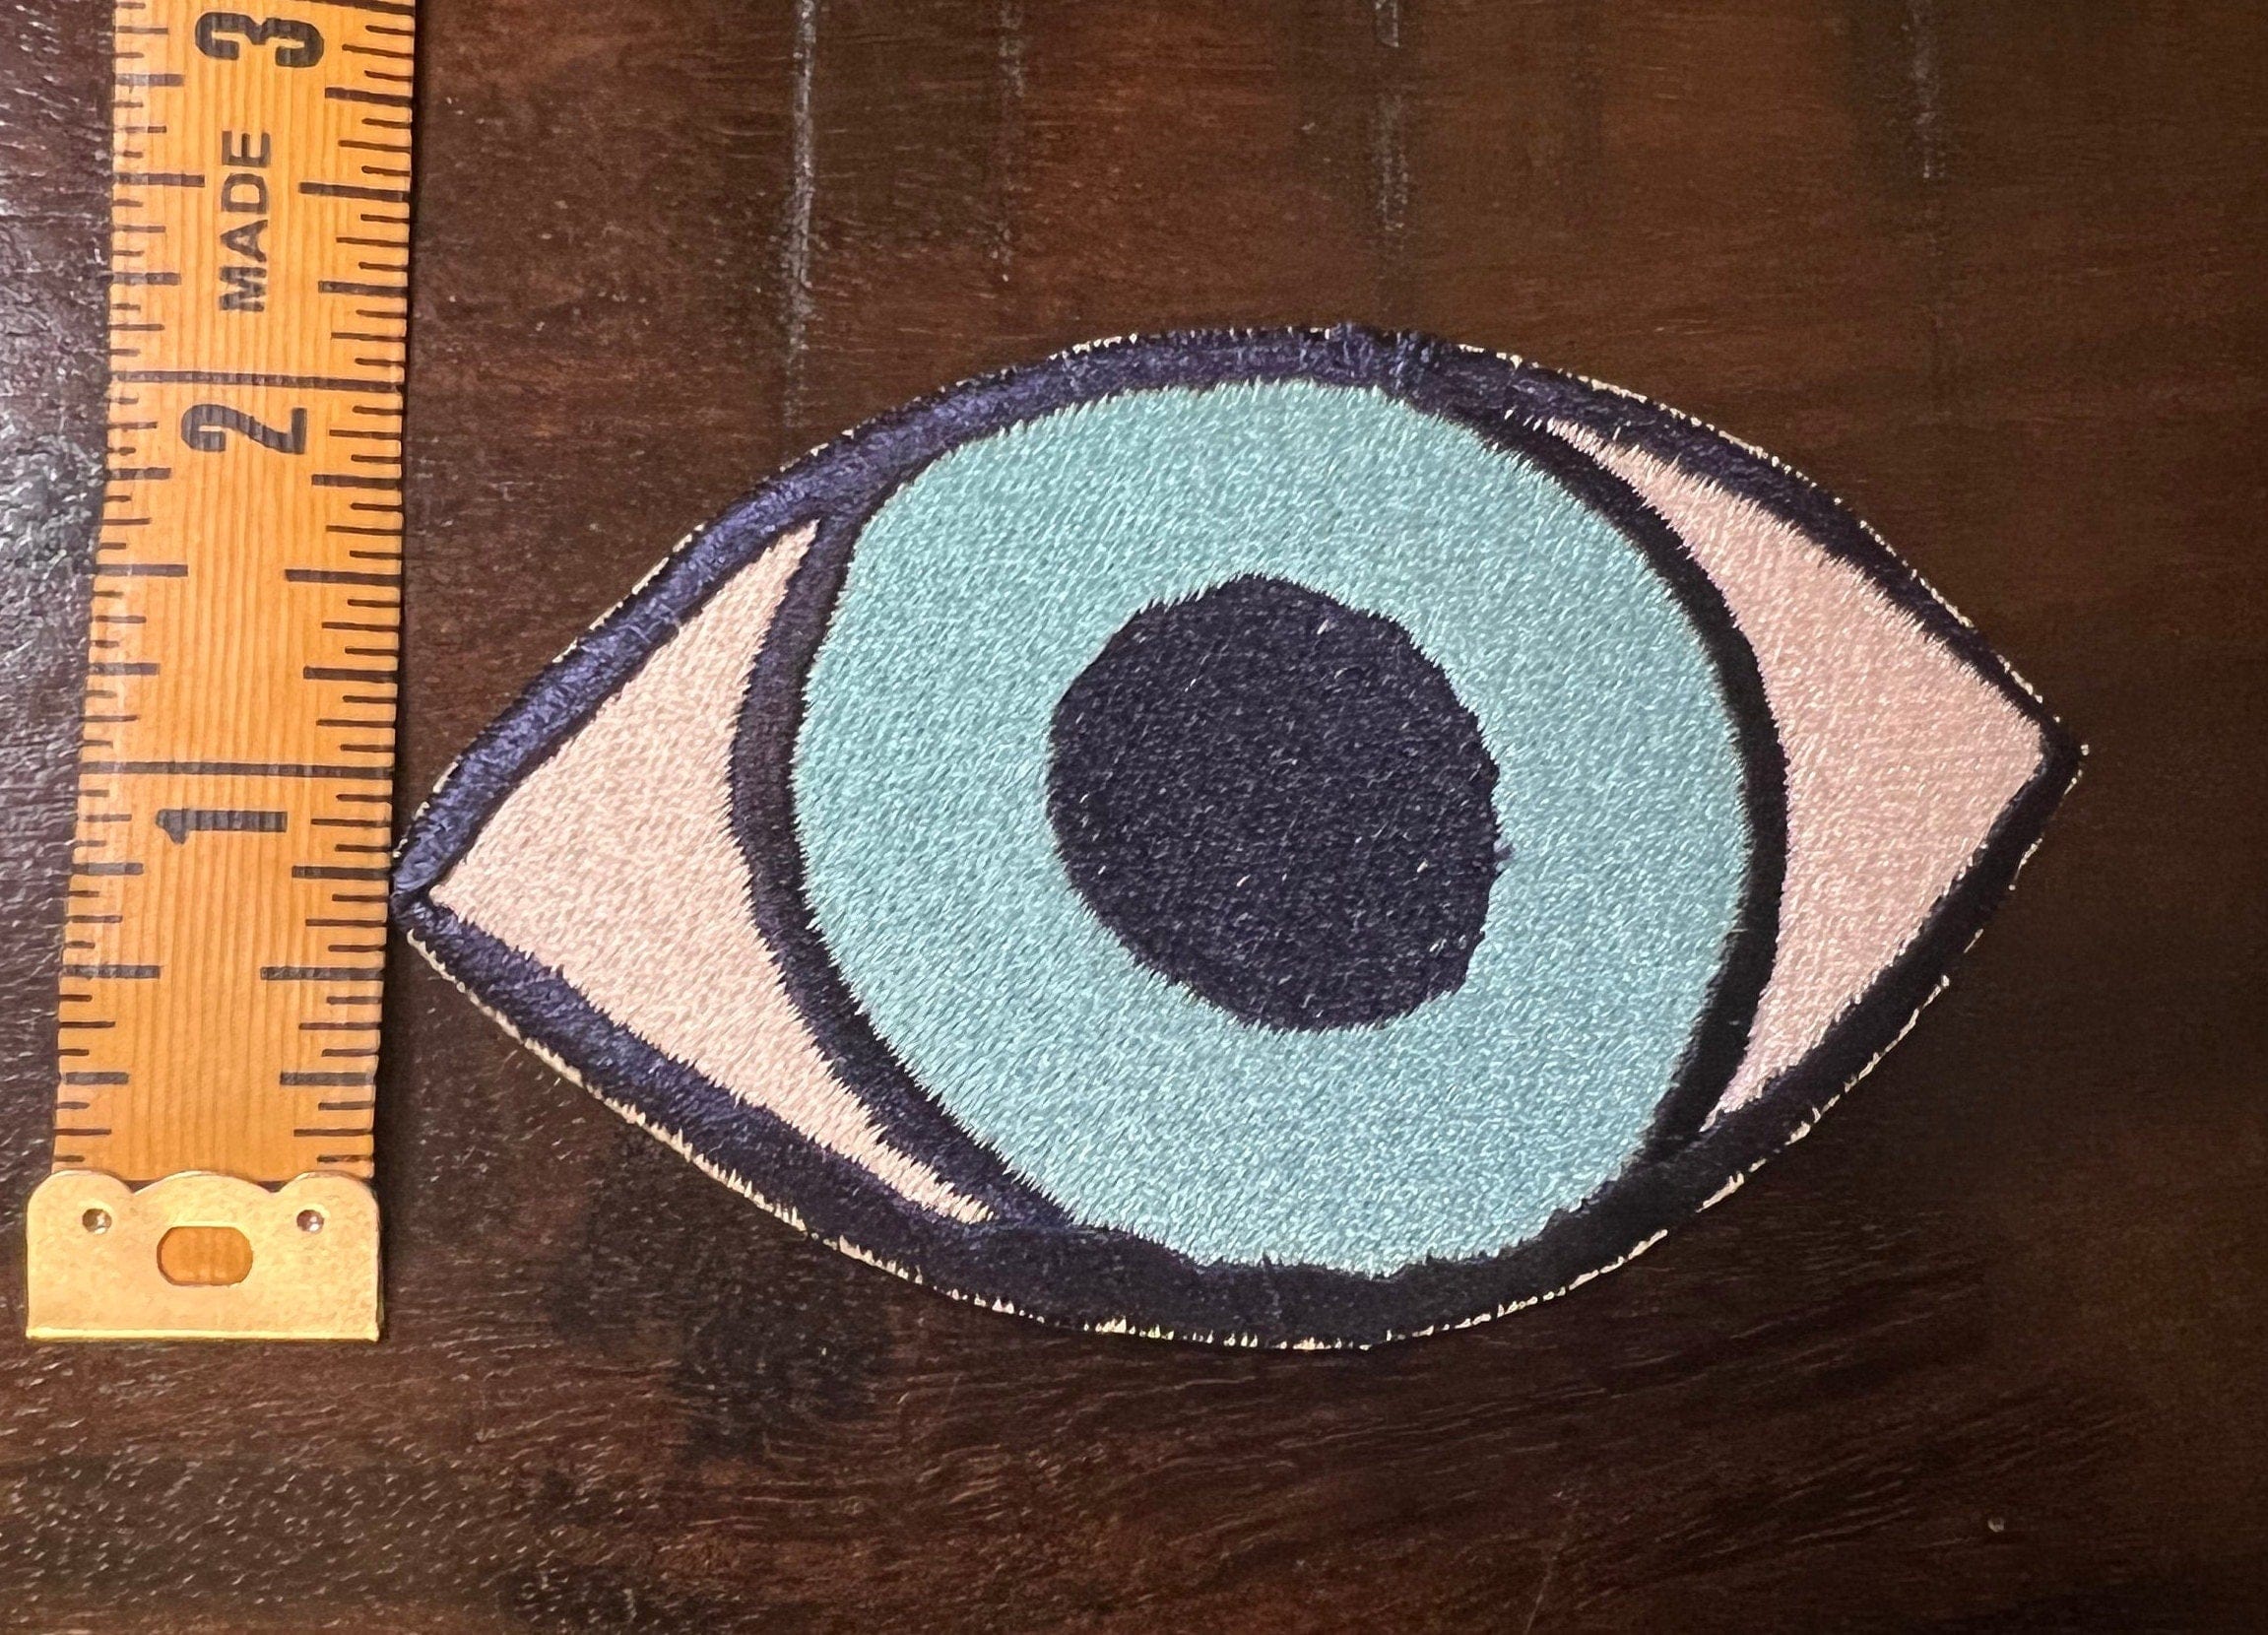 Protective Evil EYE SOULE PATCH art Denim Iron On Decal patch 4 X 2.25 black blue white embroidered Large Eye Talisman ironon patchwork Appliques & Patches